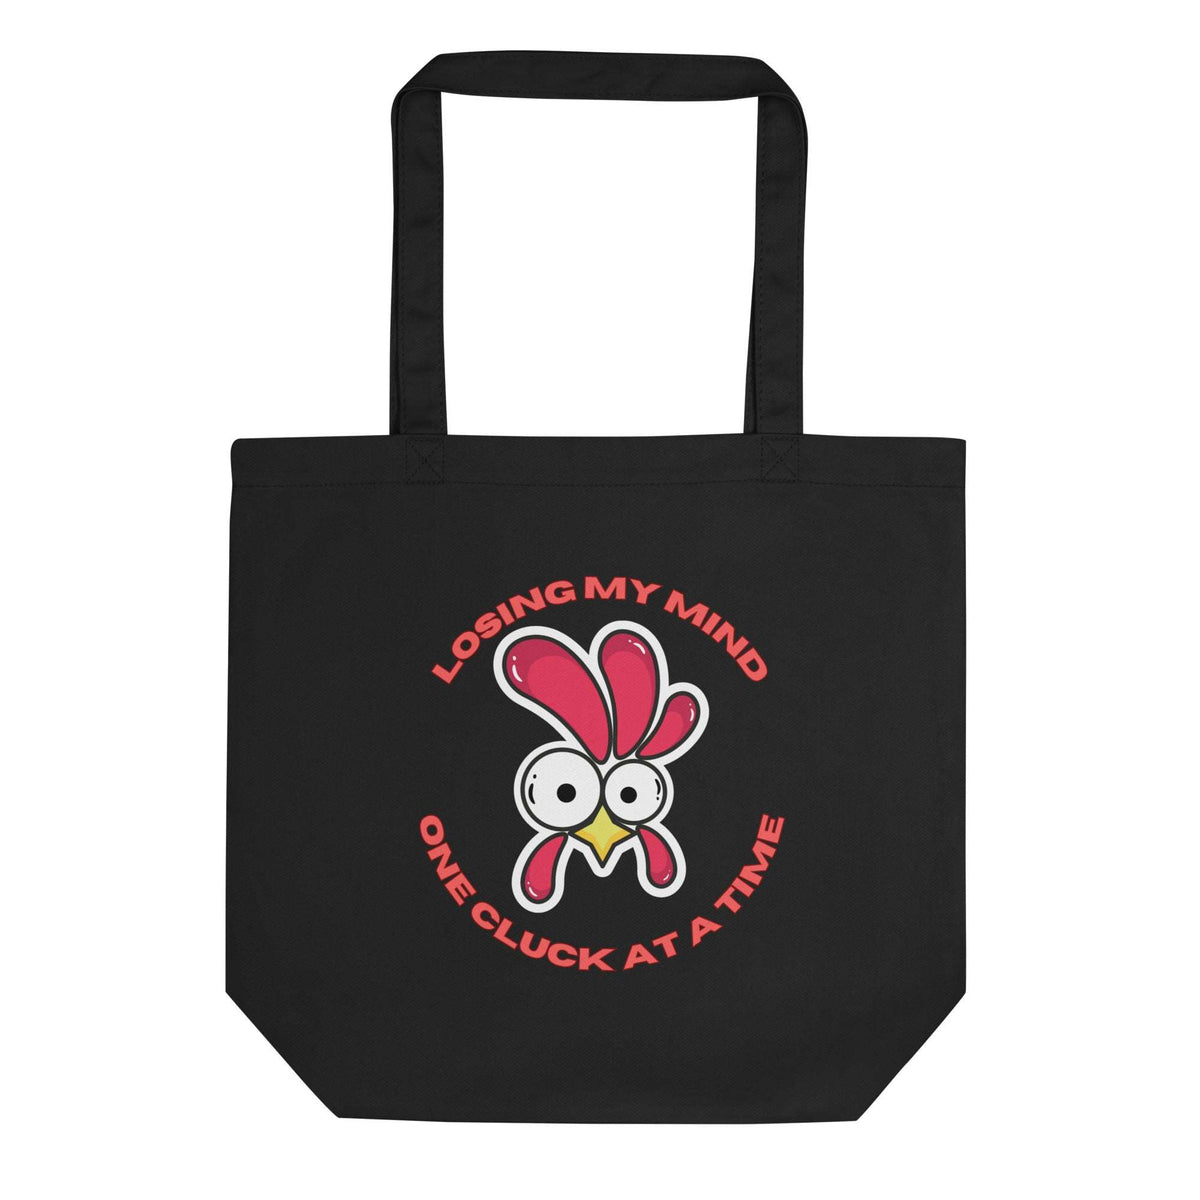 Losing My Mind Eco Tote Bag - Cluck It All Farms